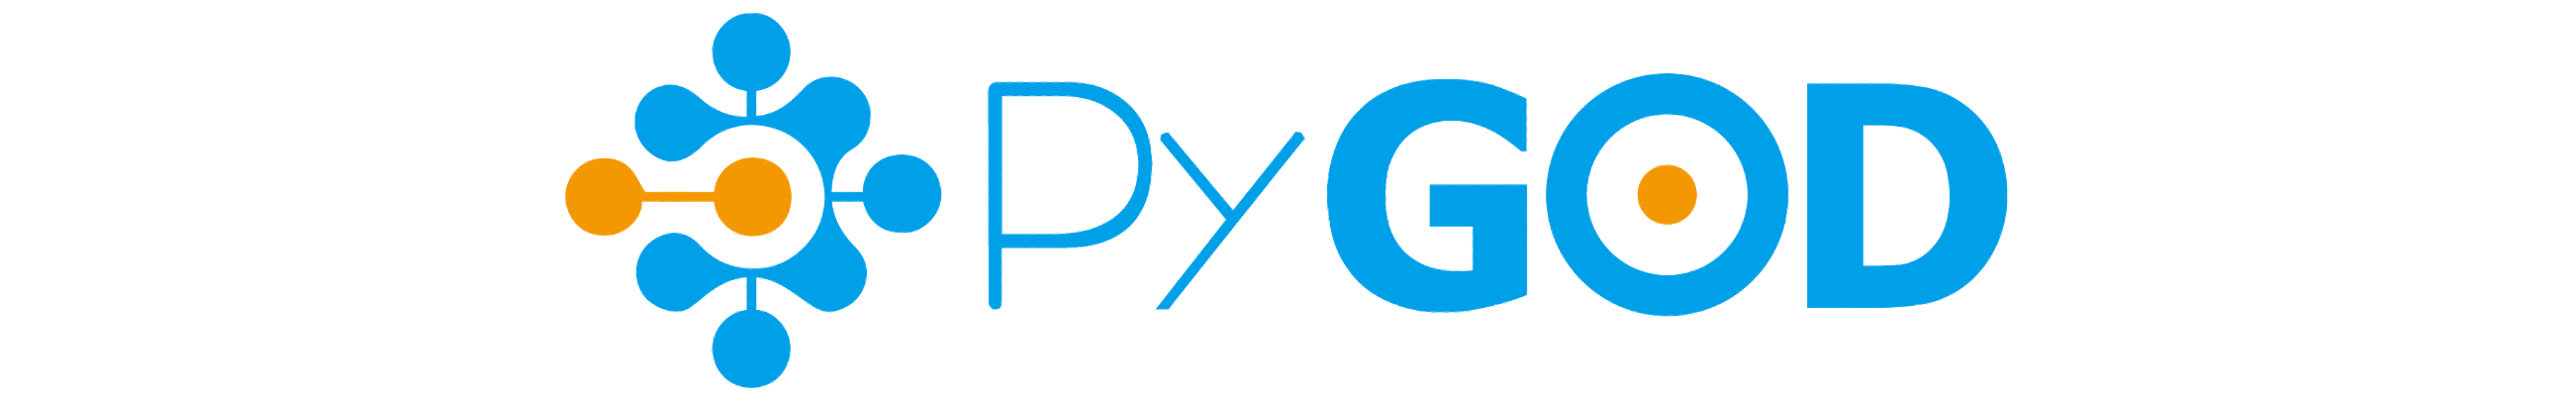 PyGOD is a Python library for graph outlier detection (anomaly detection).